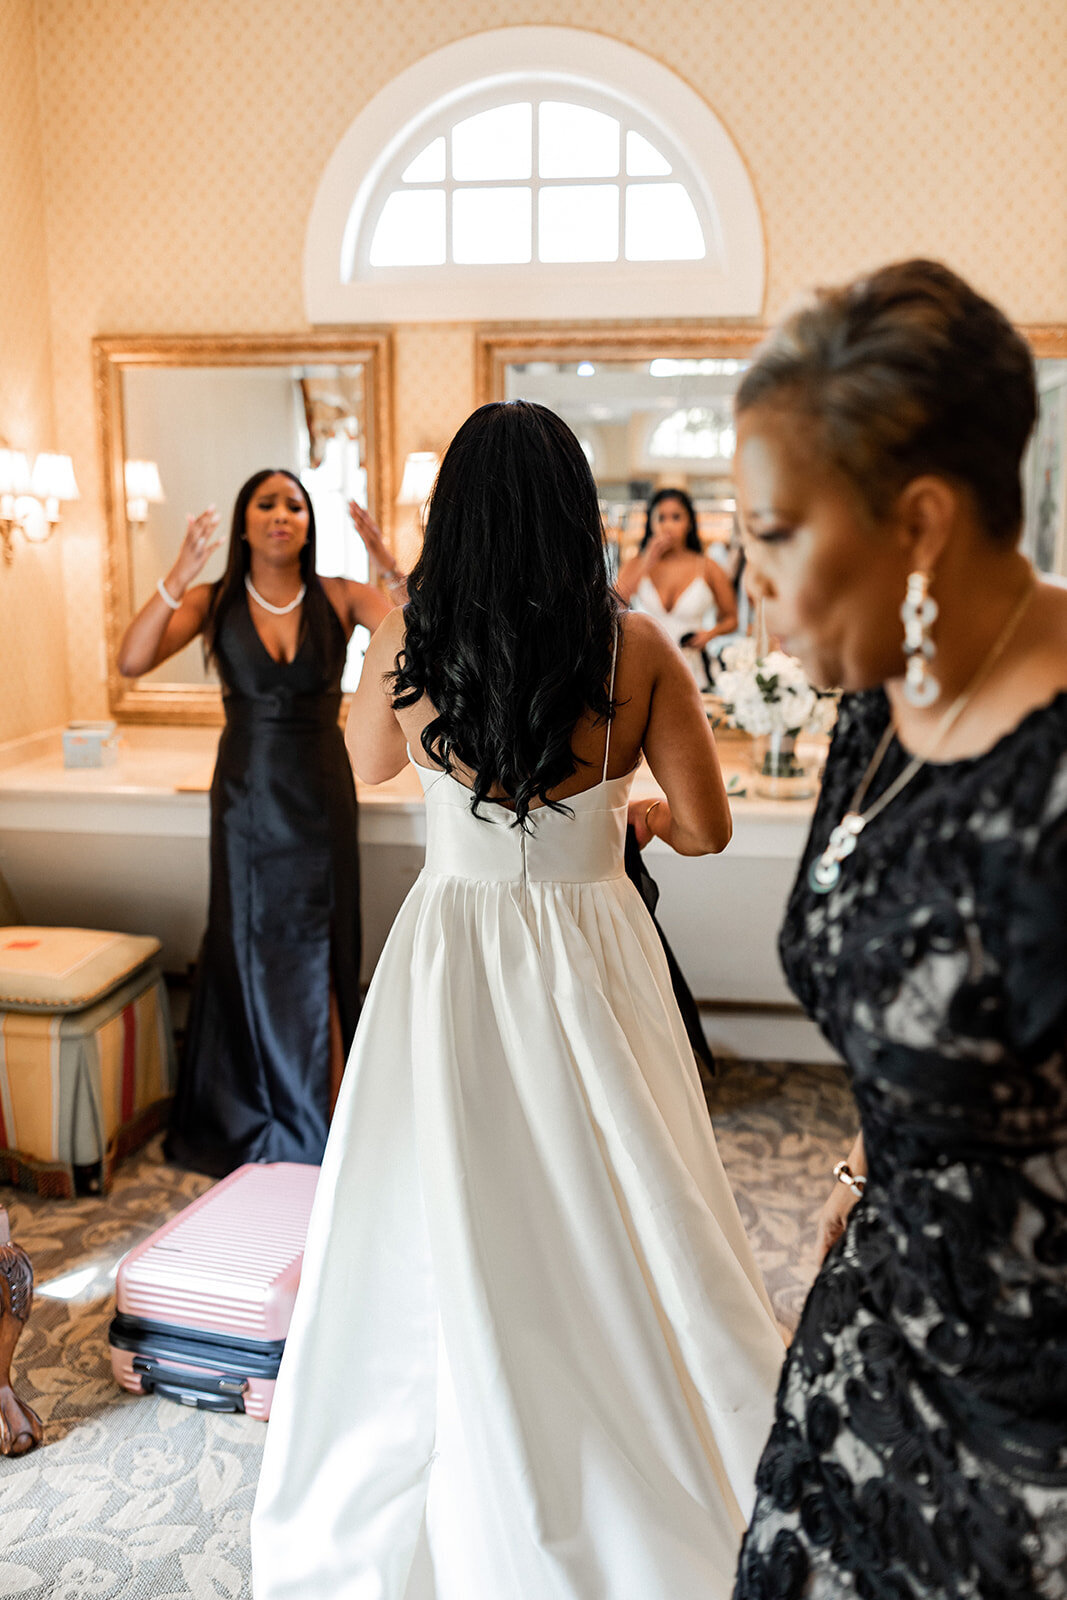 Bride in a taffeta wedding dress getting ready with her bridesmaids and the mother of the bride